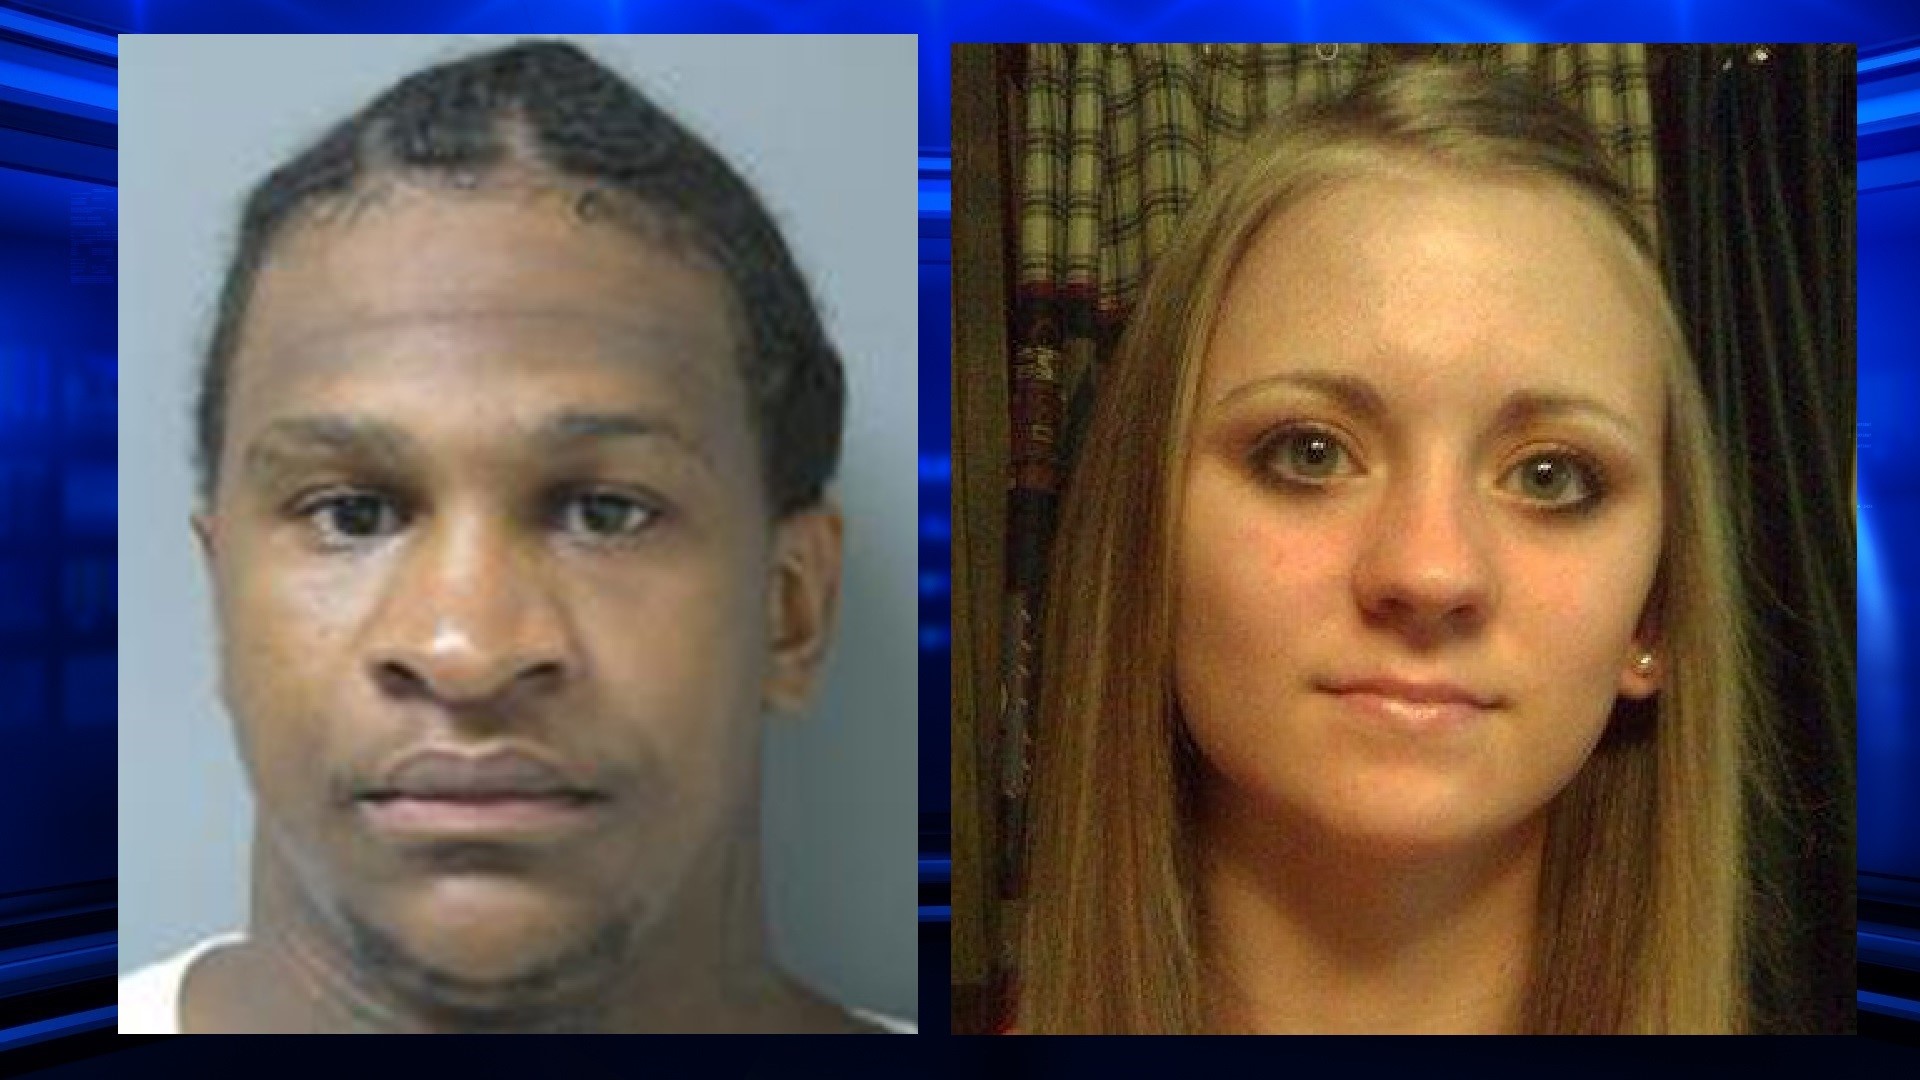 Jury Selected In Murder Trial Of Man Charged With Killing Jessica Chambers